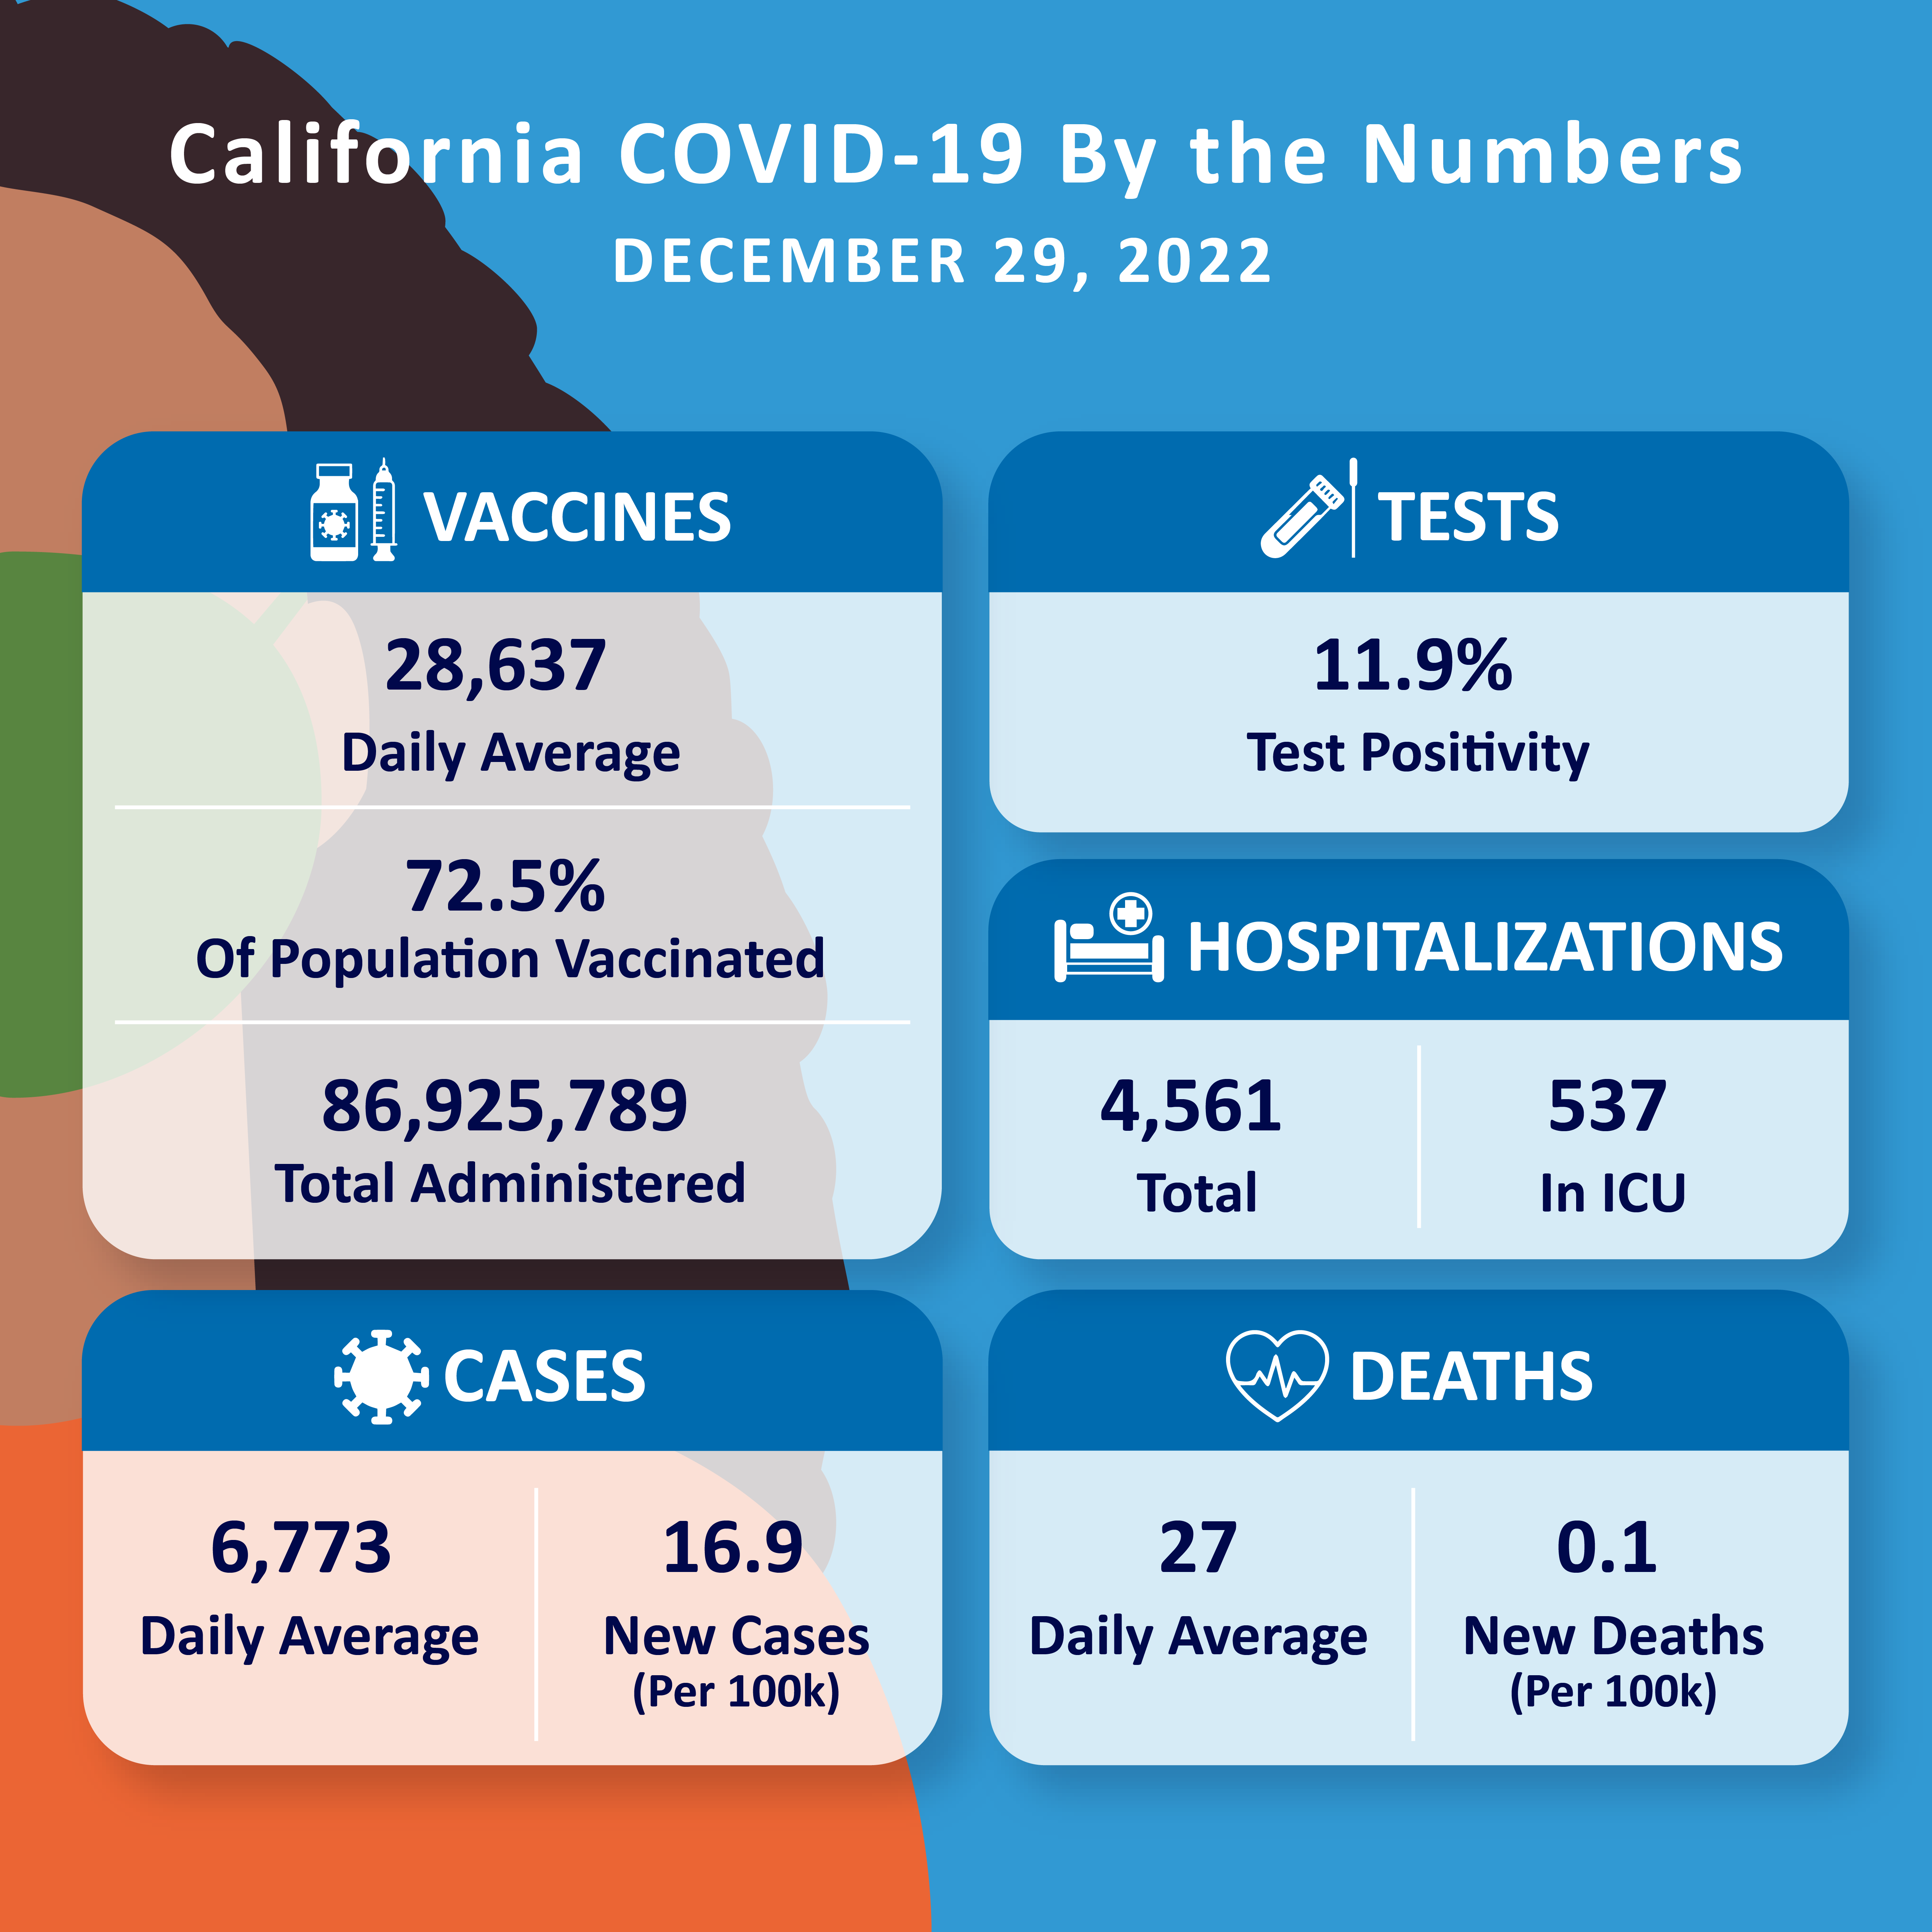 COVID-19 By the Numbers